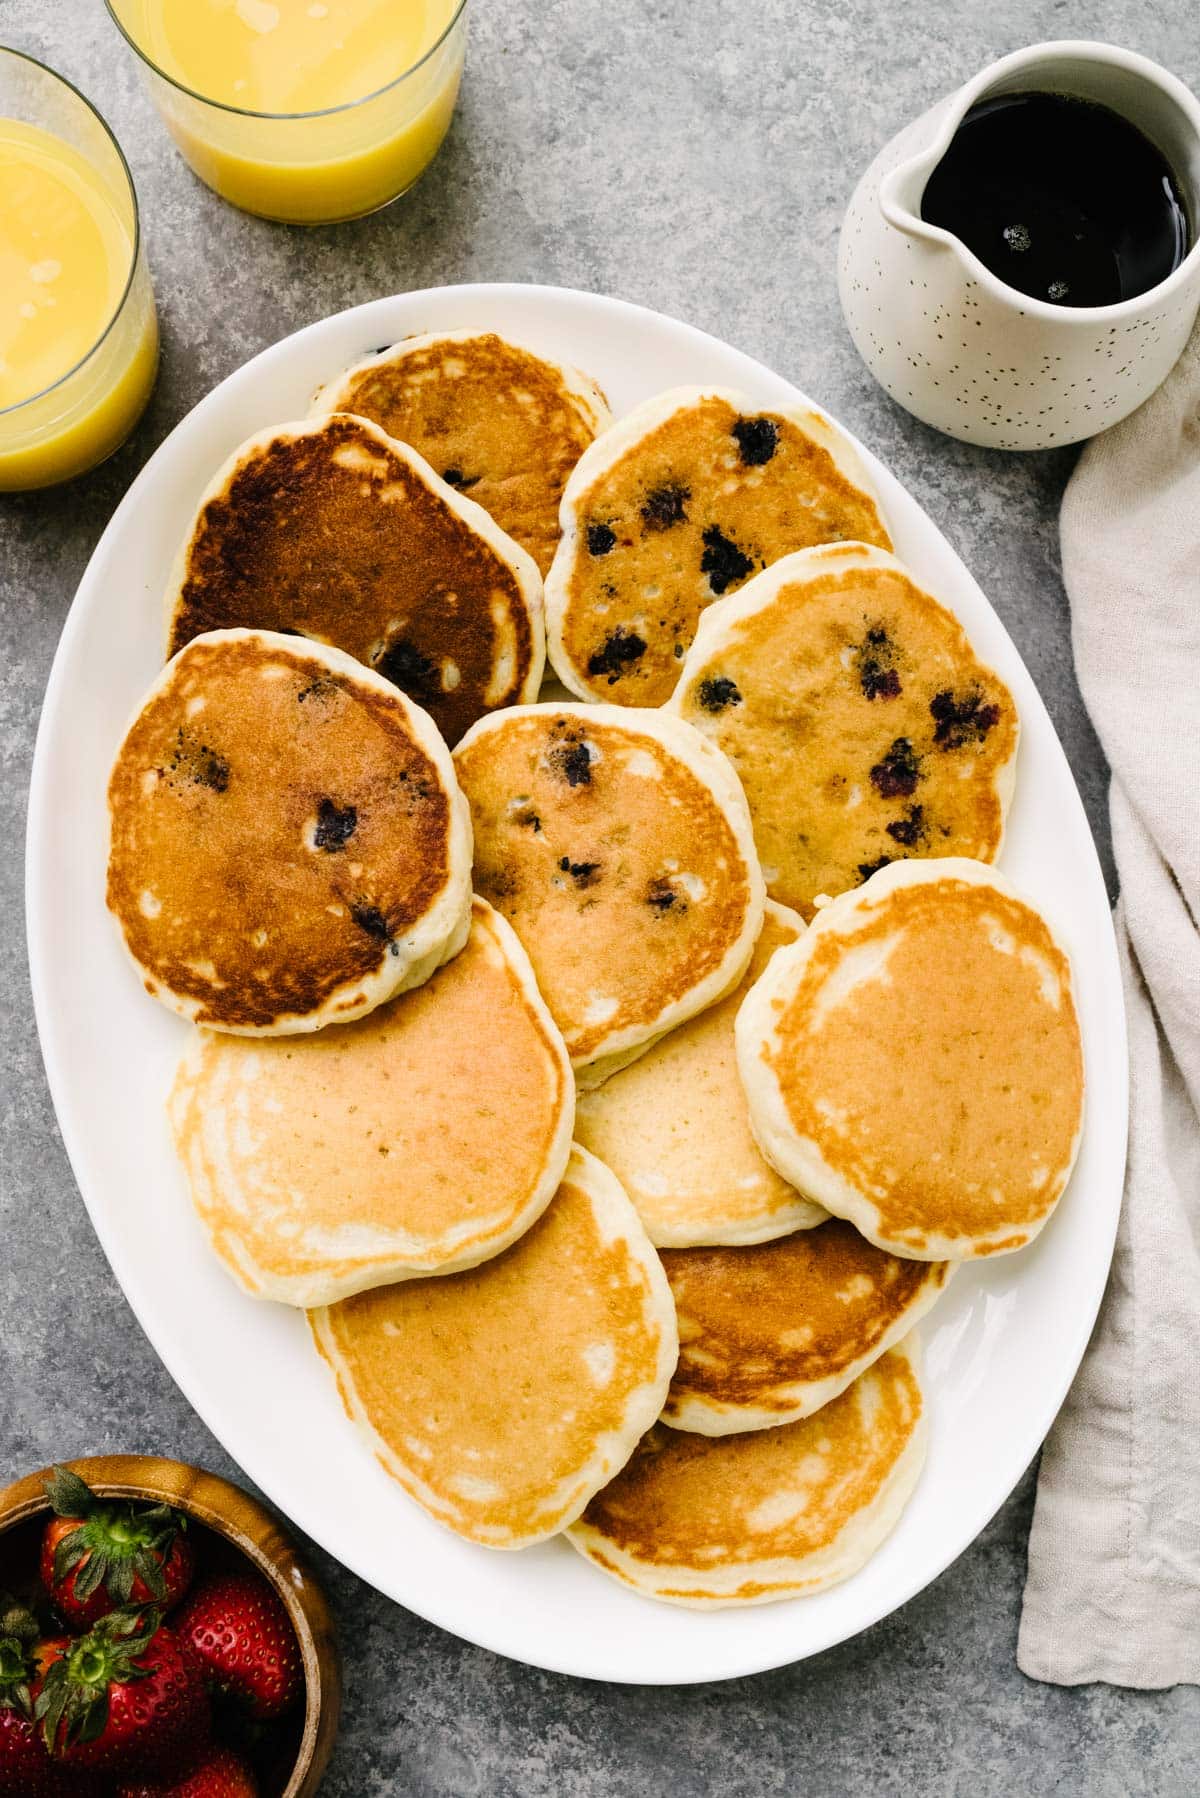 A platter of plain homemade pancakes, blueberry pancakes, and chocolate chip pancakes on a marble background; two glasses of orange juice, a bowl of strawberries, a small pitcher of maple syrup, and cream linen napkin surround the platter.